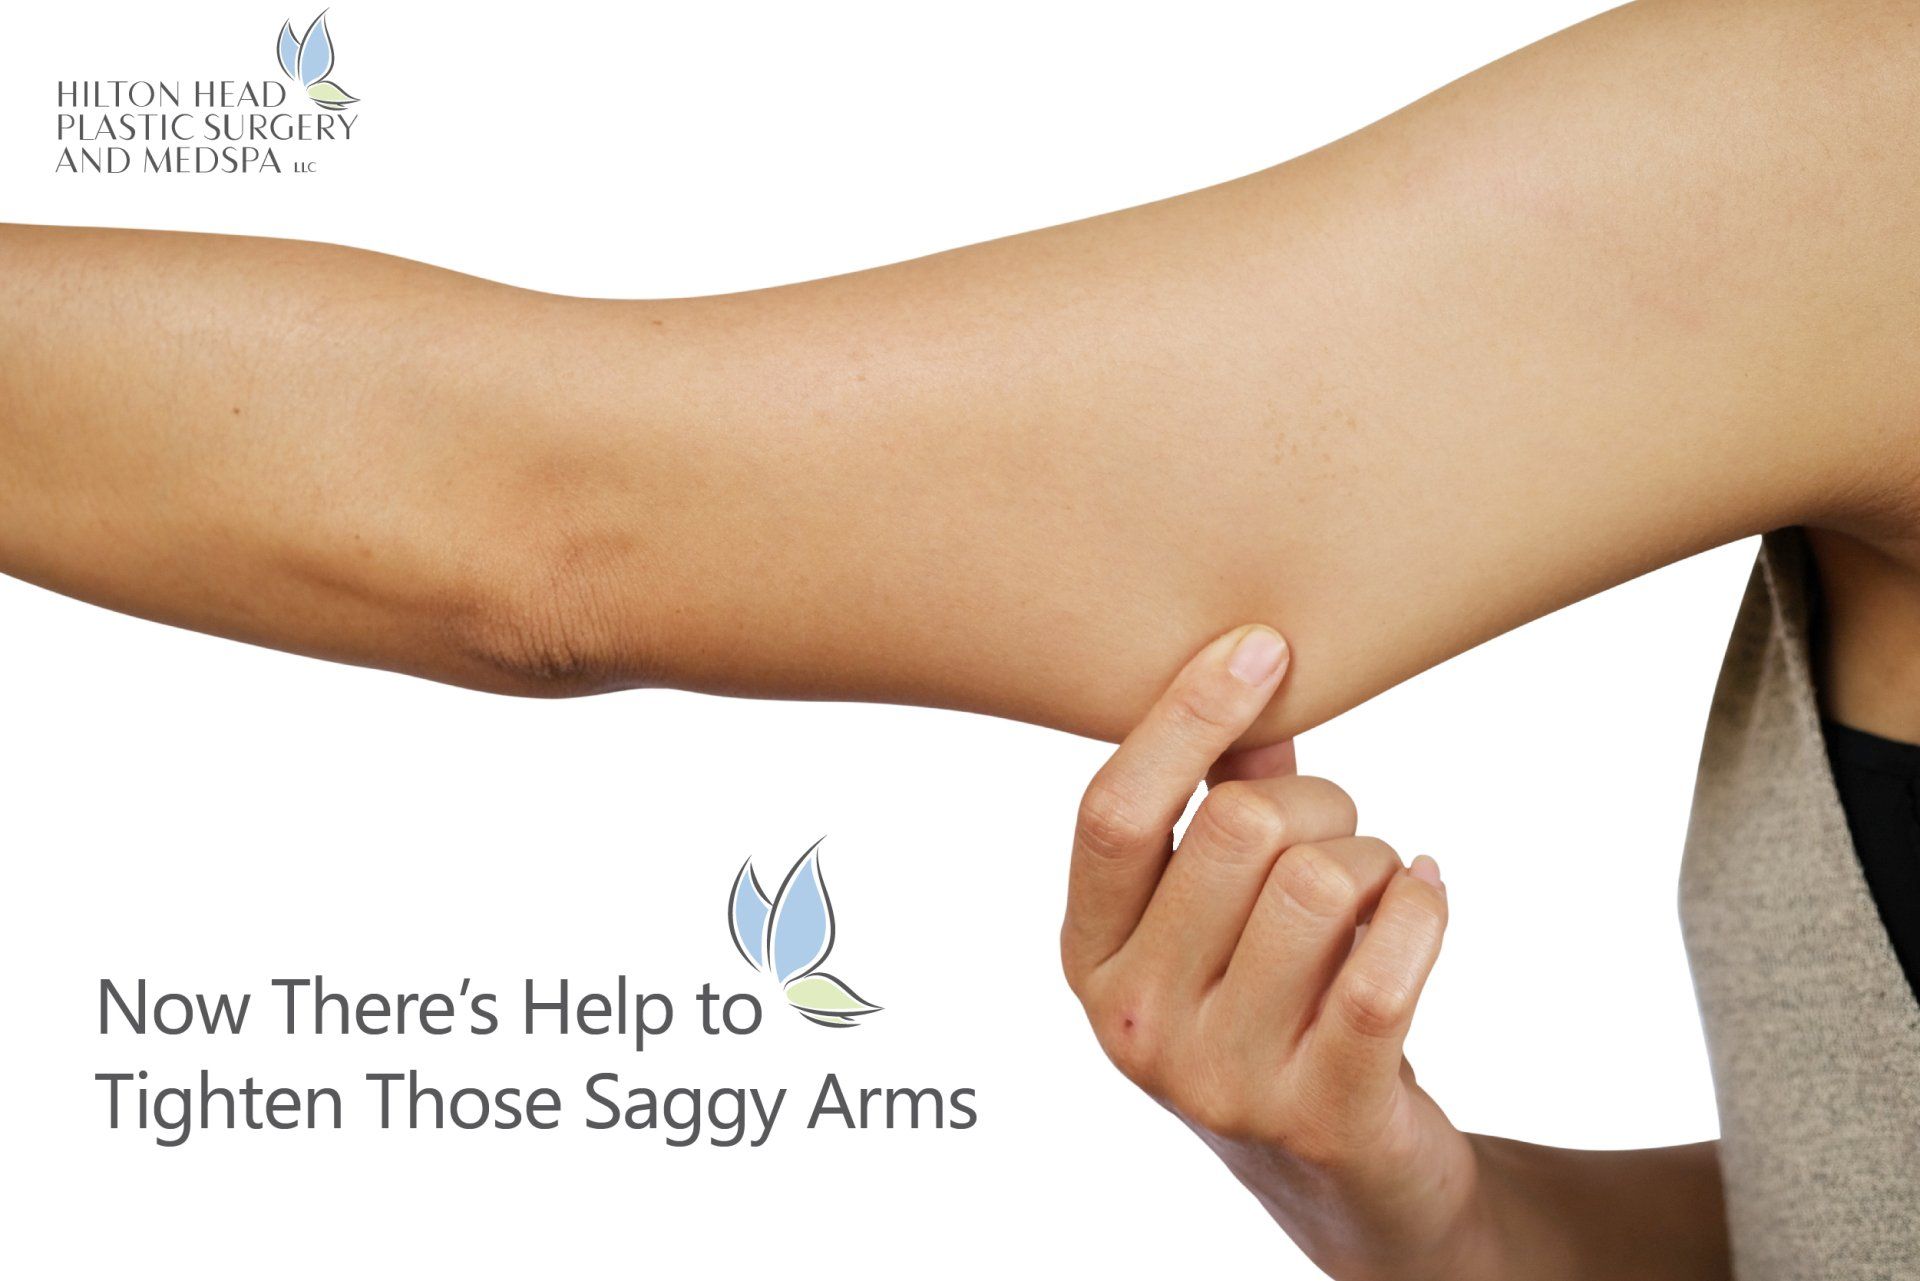 Now There's Help to Tighten Those Saggy Arms